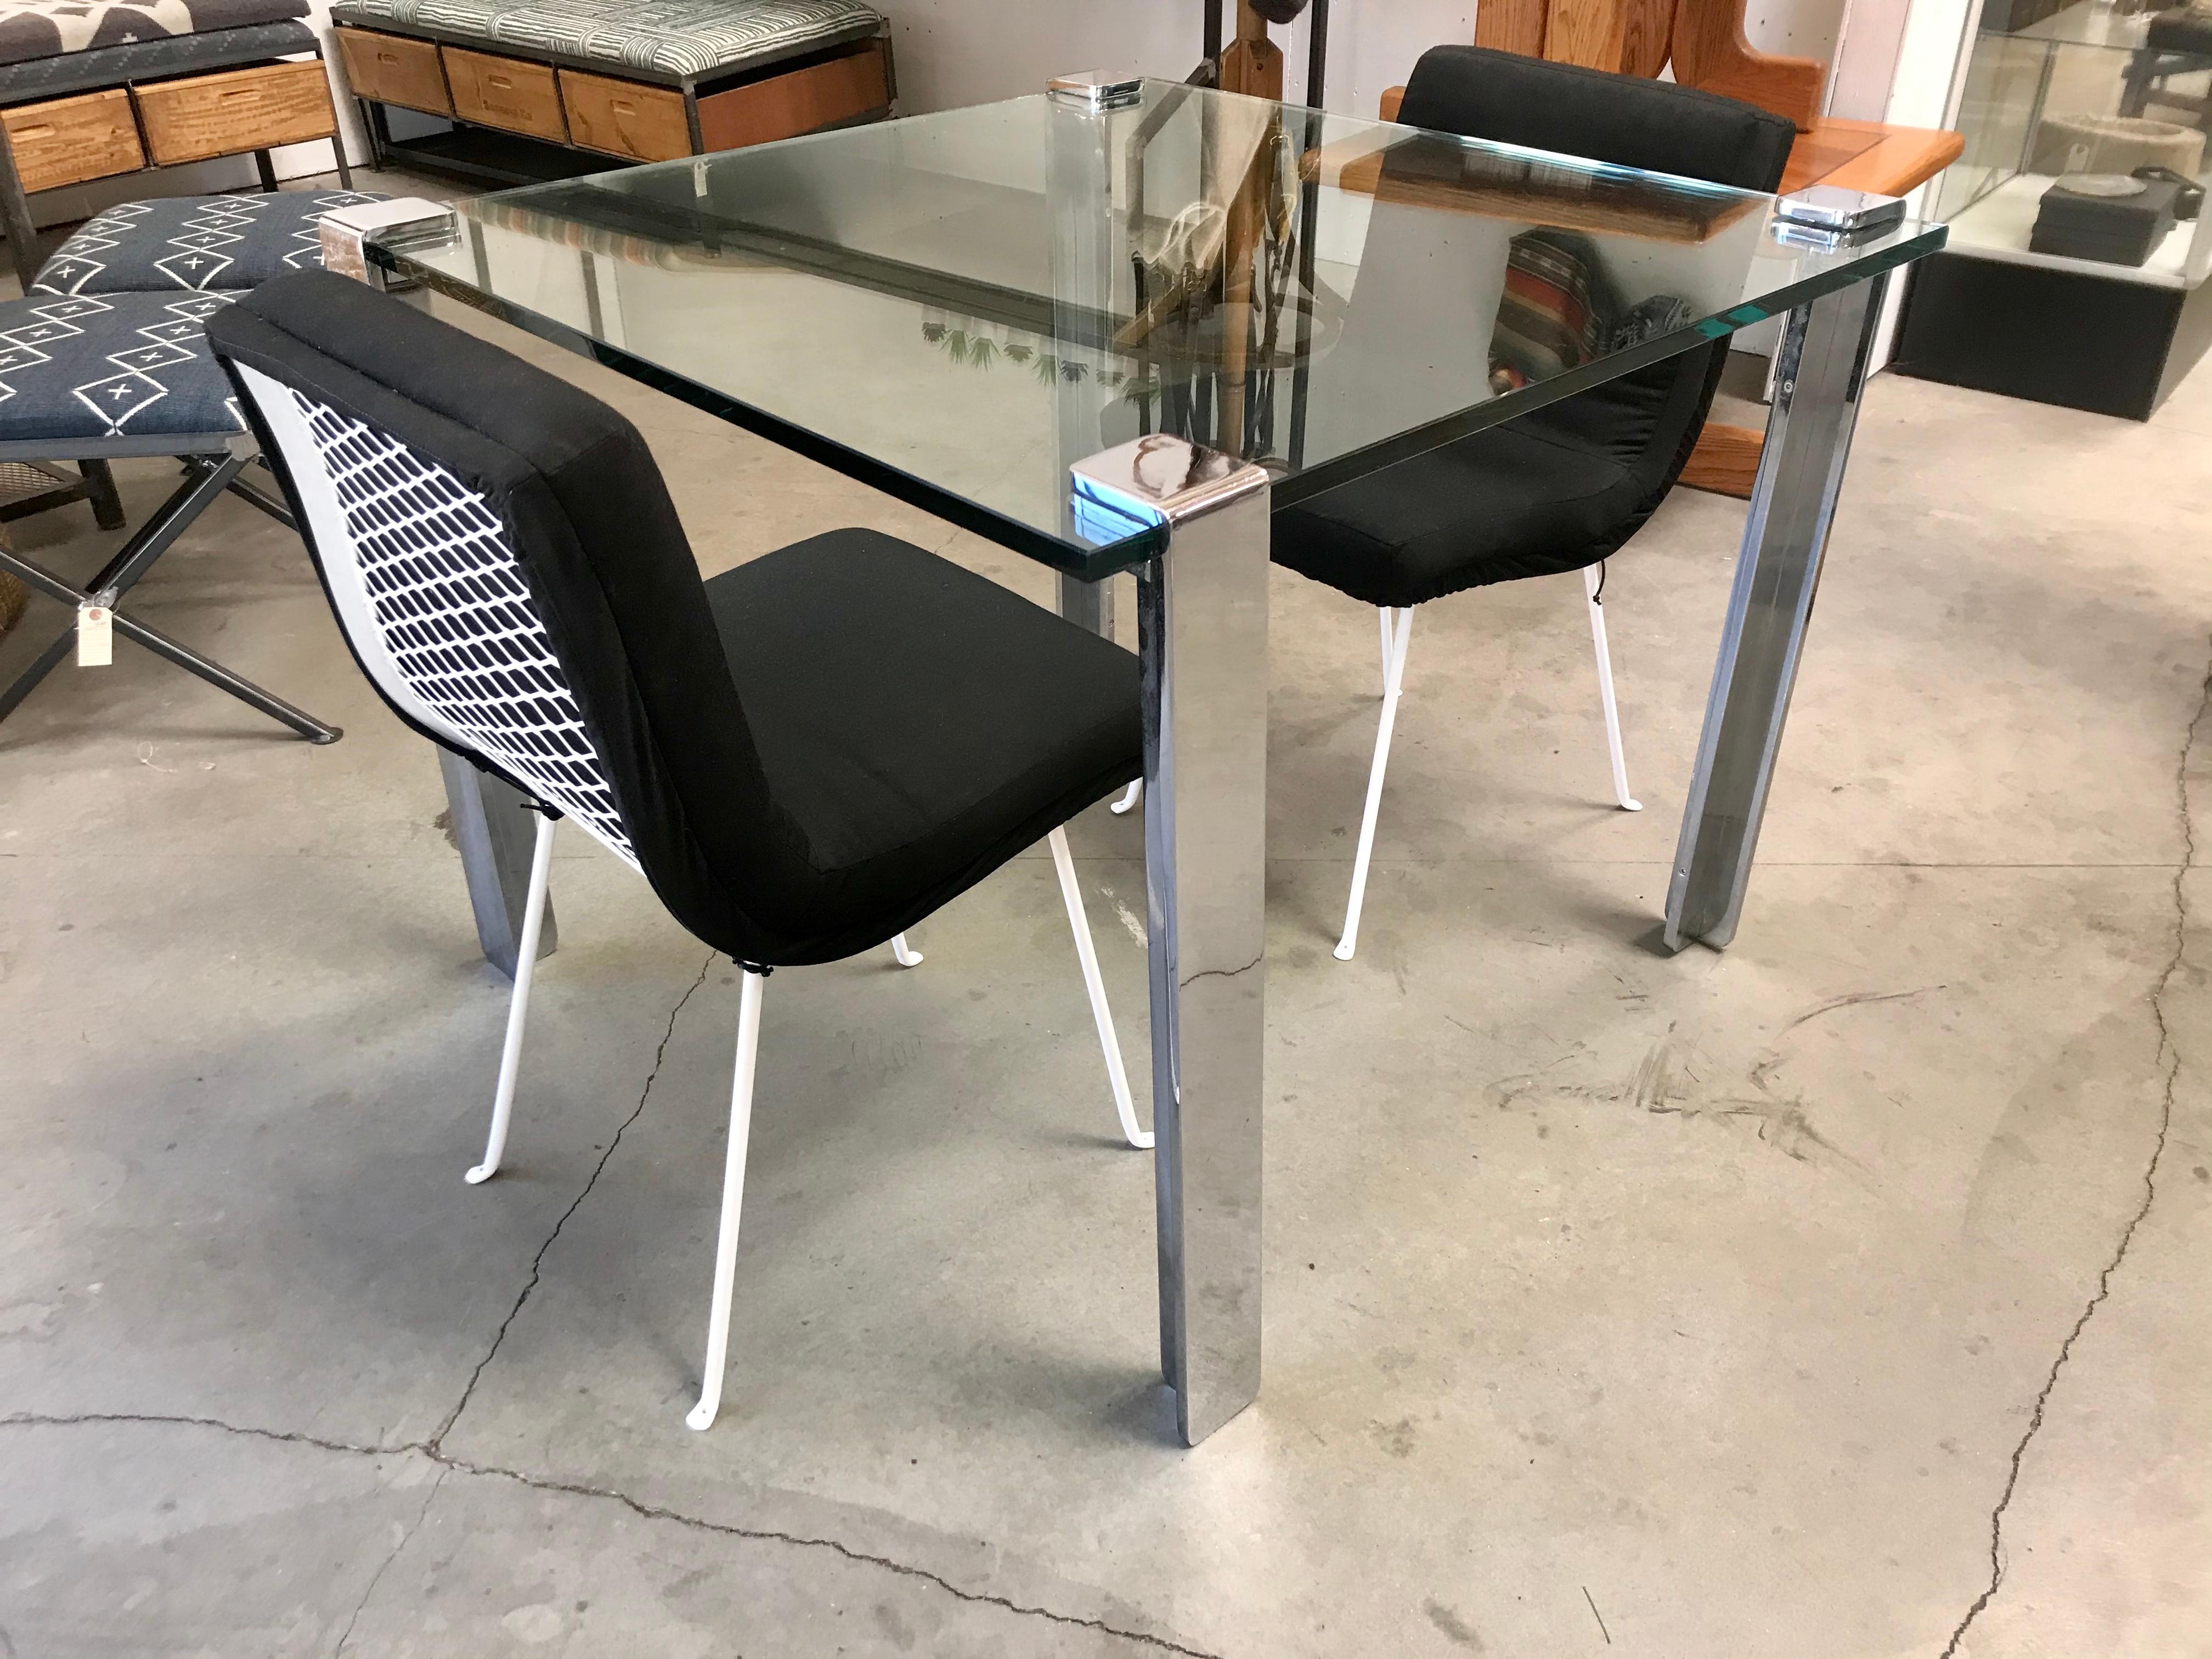 California design.
Limited.
From his Eon line.
Thick glass with four chrome plated heavy steel bases that clamp onto the glass. 
There are bolts under the clamps that can be loosened for removal and tightened for stability.
Nice modernist